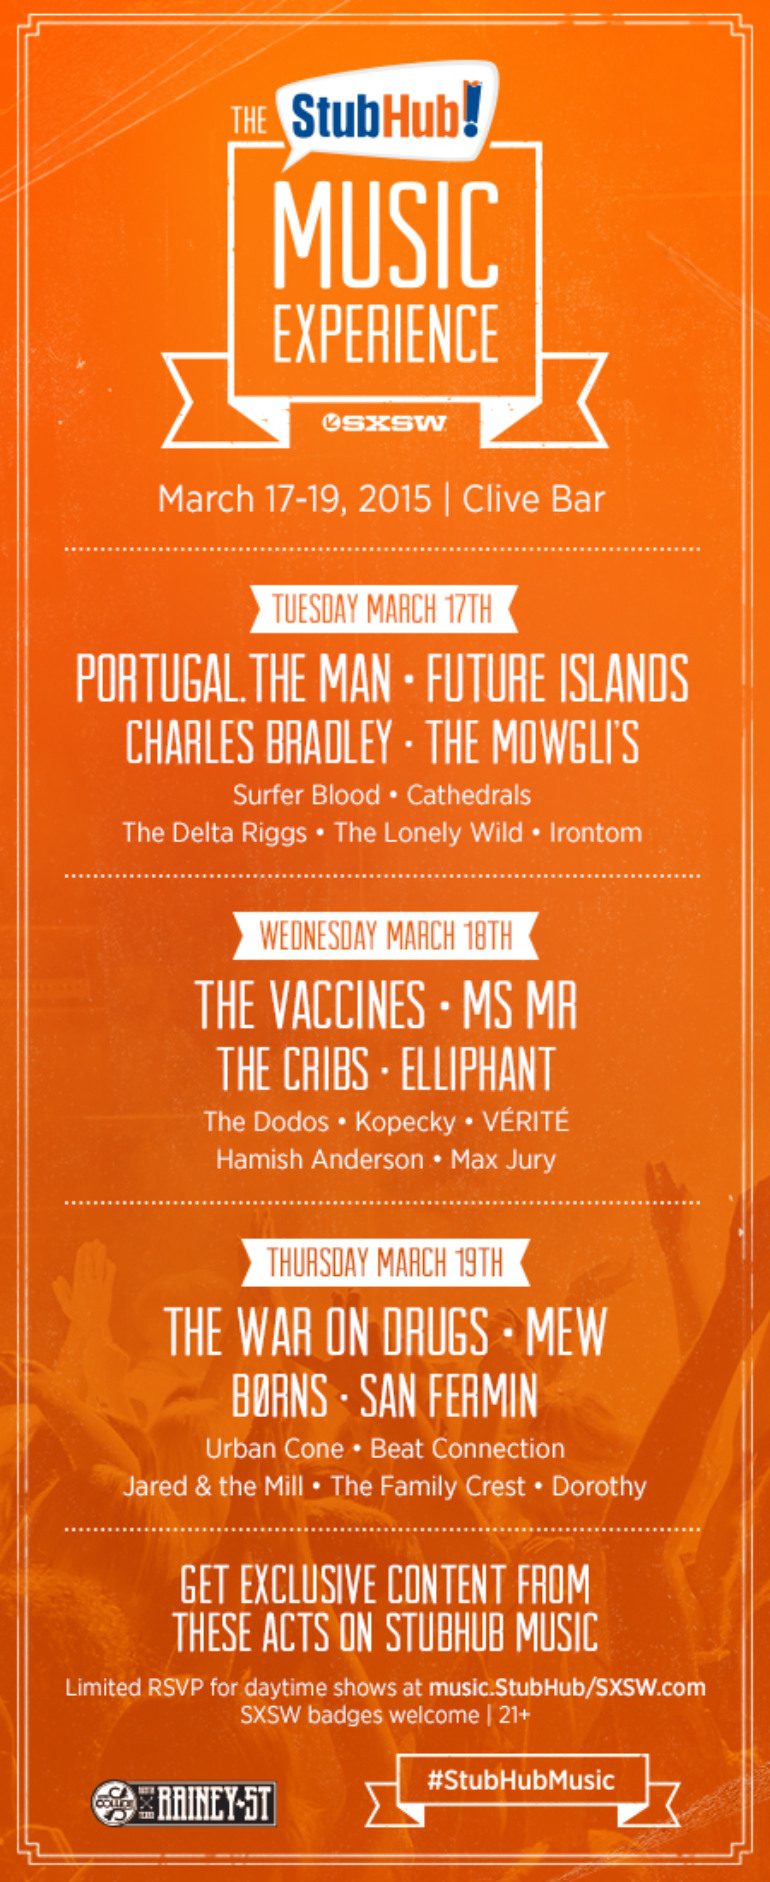 StubHub and Culture Collide SXSW 2015 Music Experience Announced